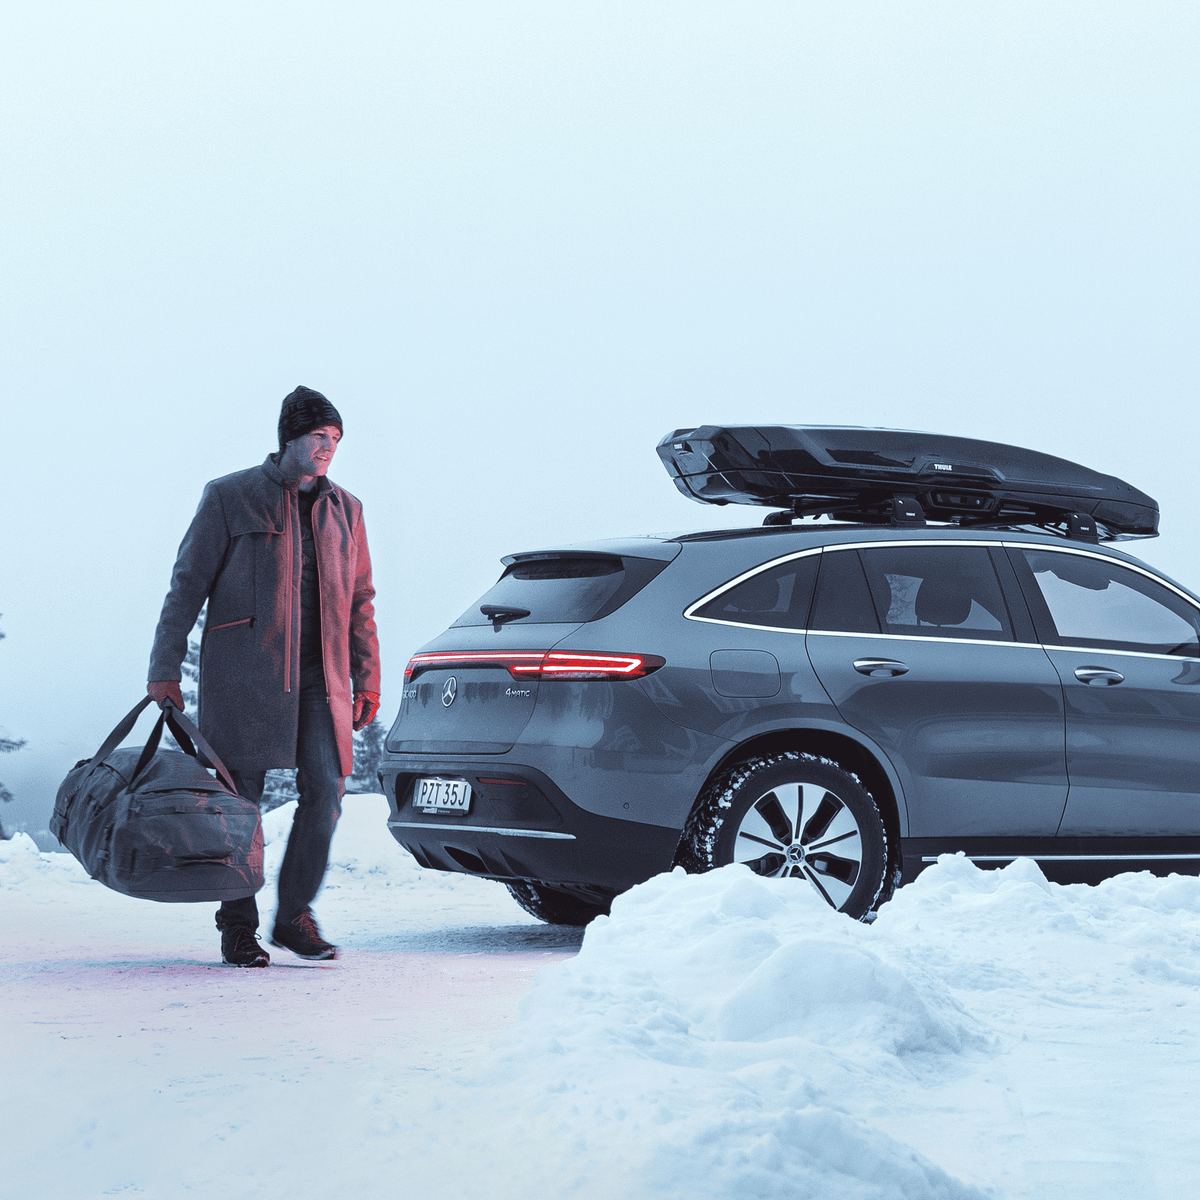 A man is unloading their ski gear from a car with a roof top box in a snowy landscape